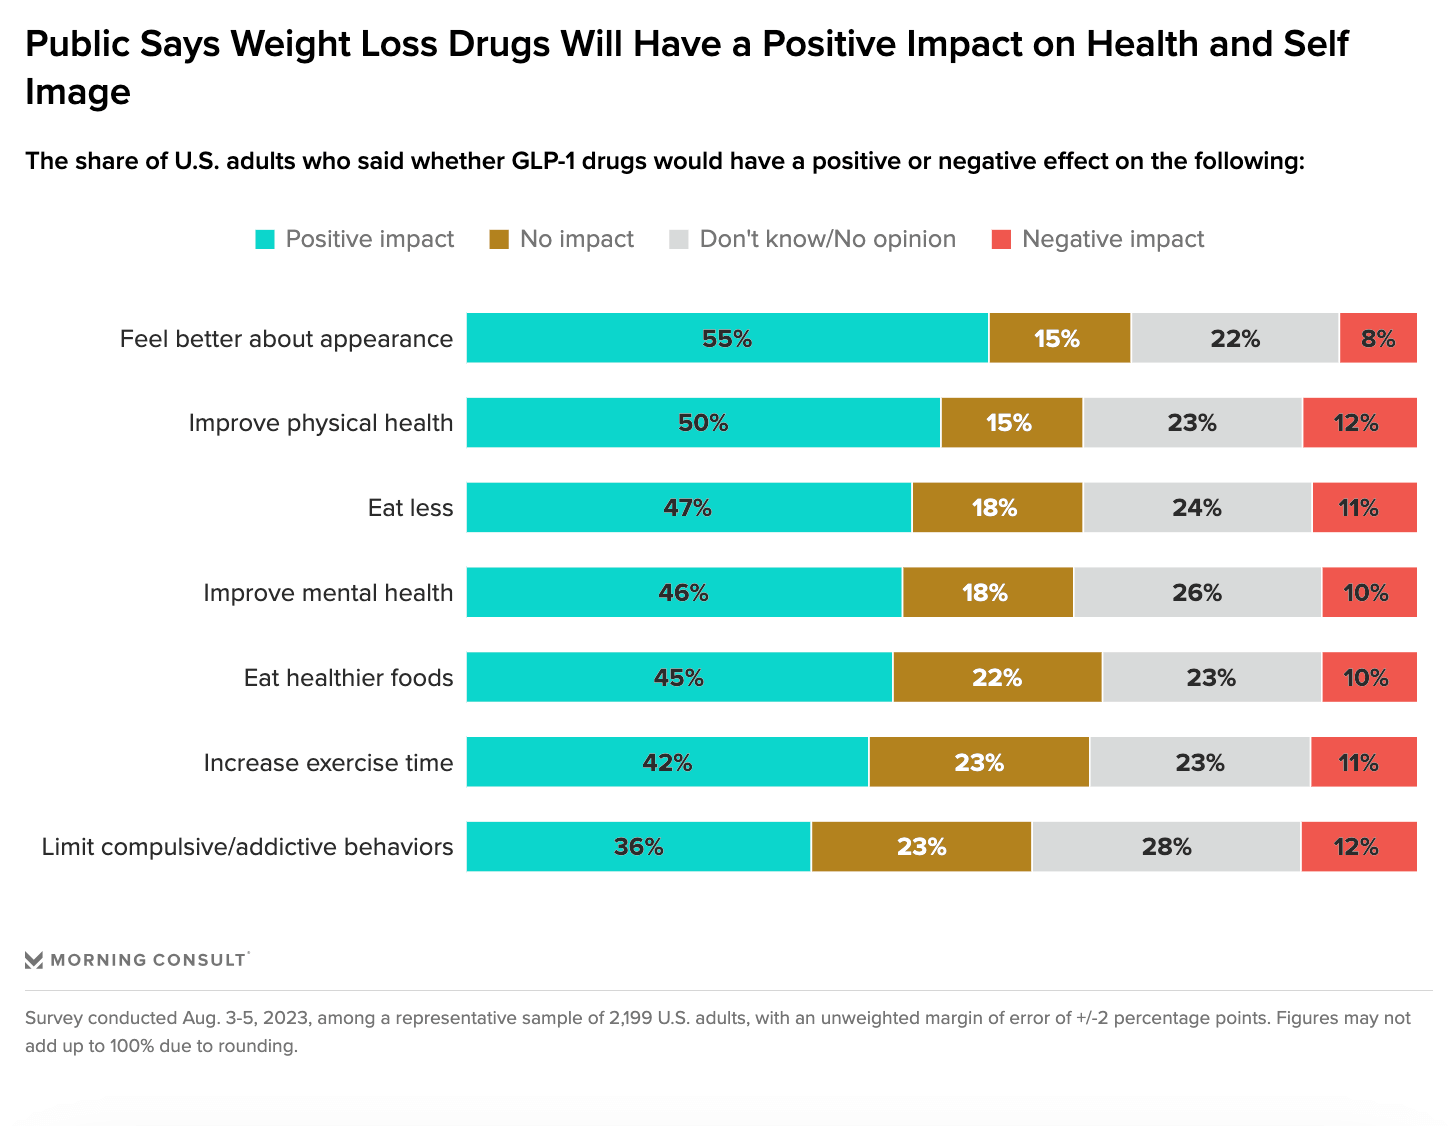 morning consult pro table on weight loss drugs